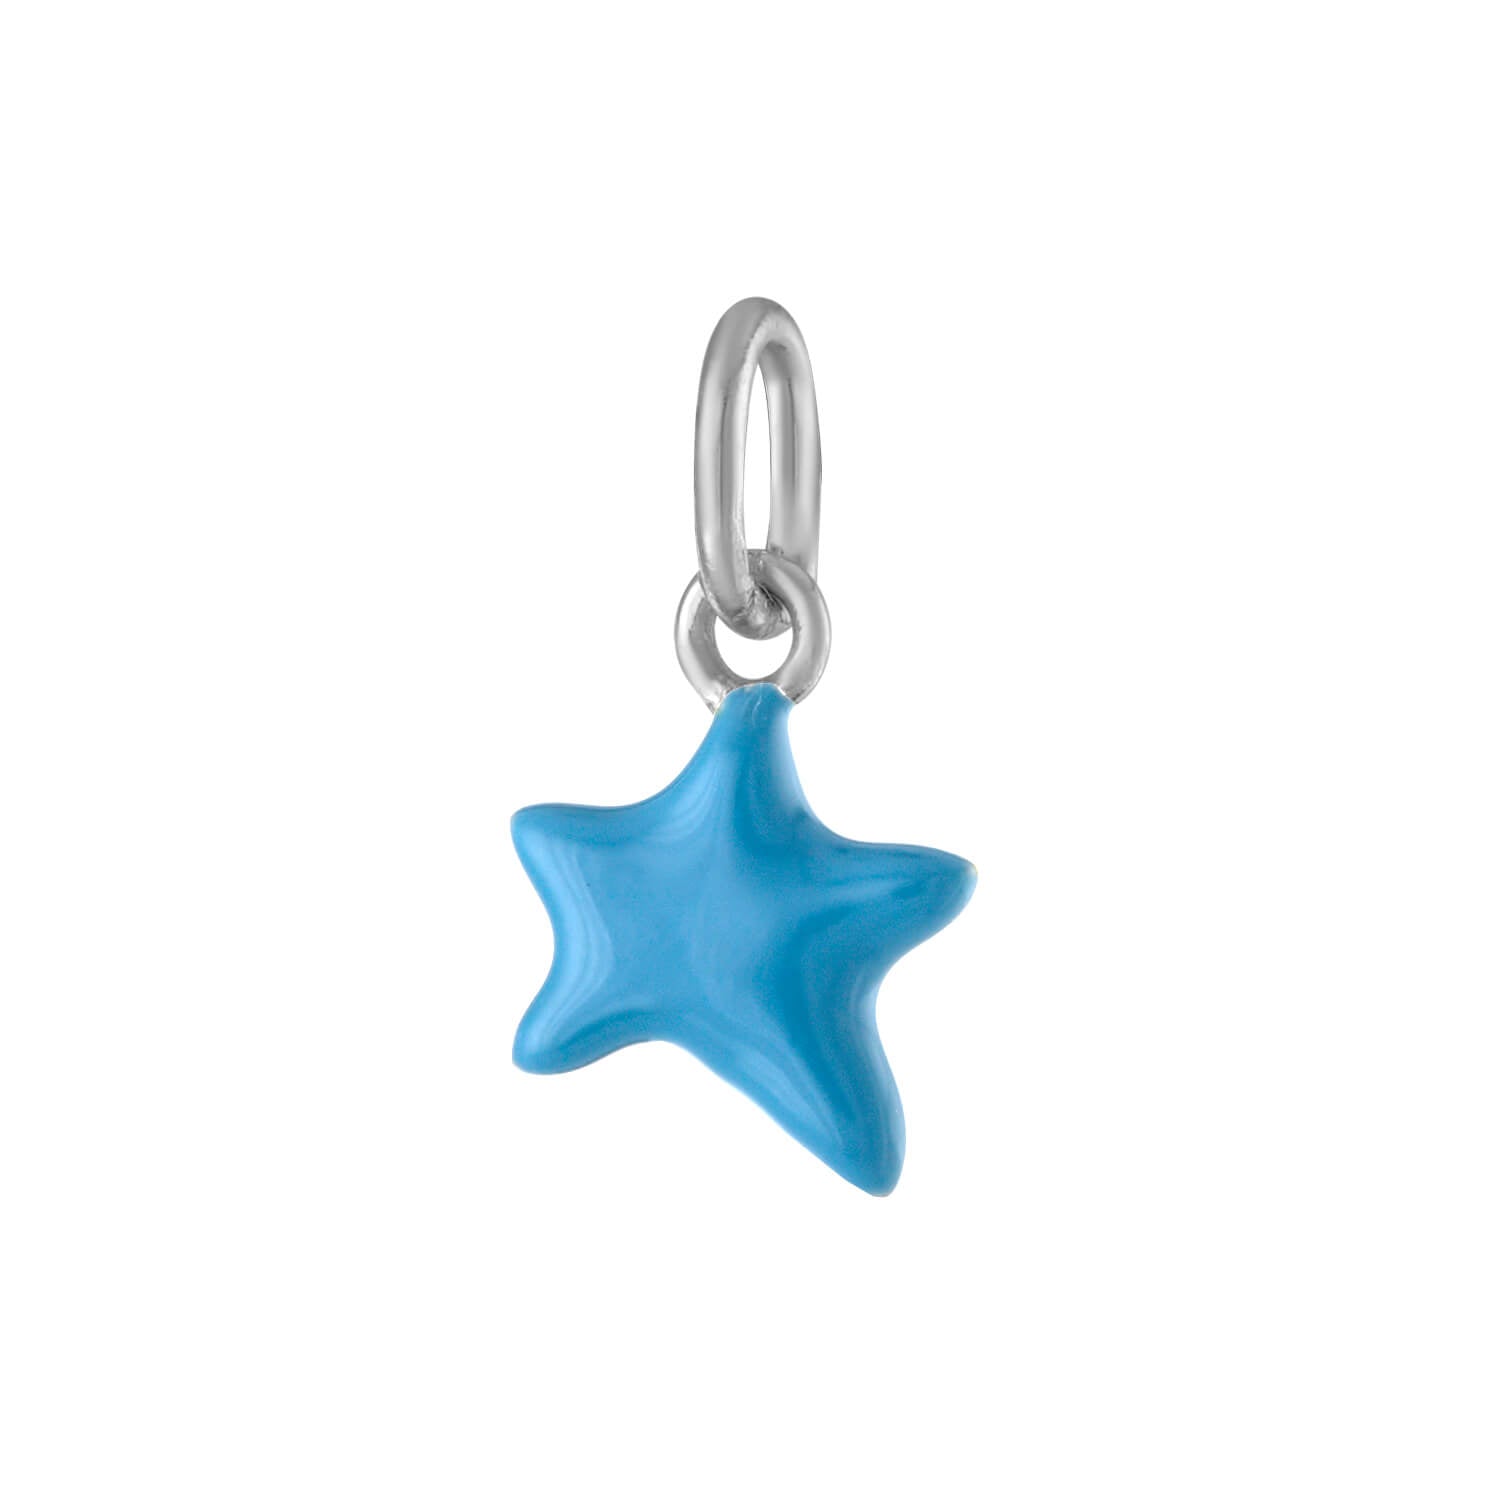 Itty Bitty Turquoise Wishing Star in Sterling Silver